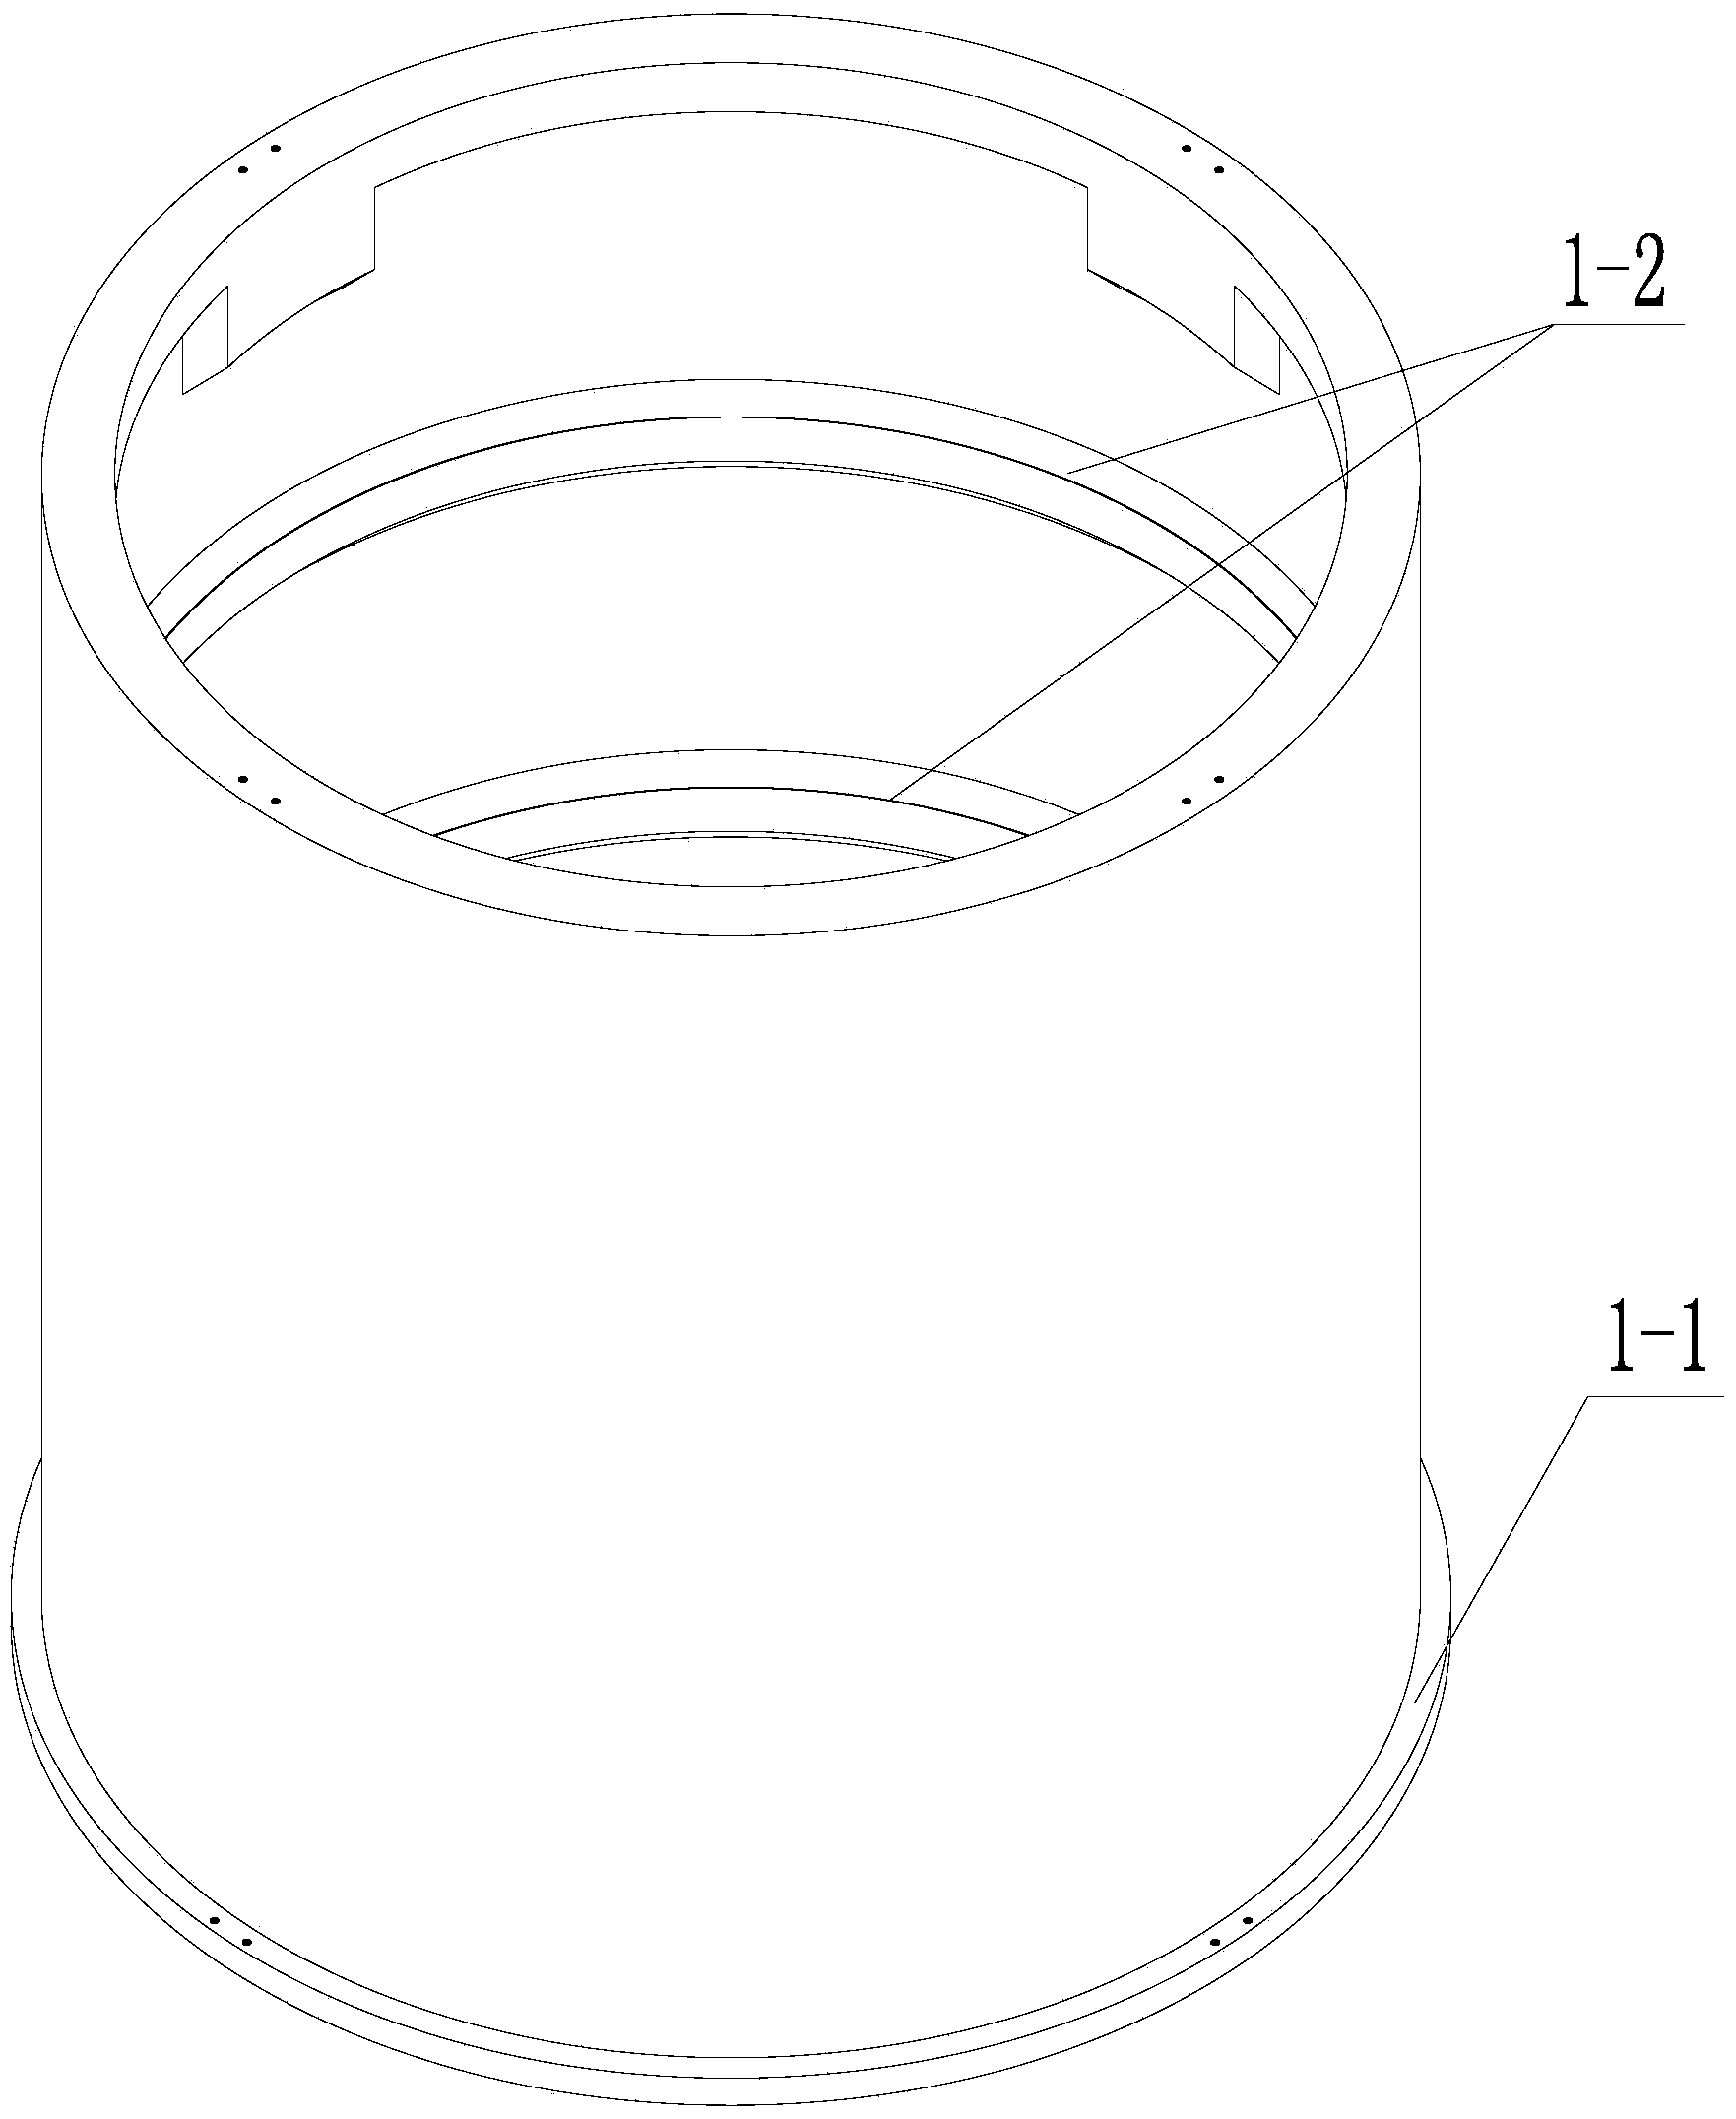 Arc-shaped titanium alloy thin-walled part forming tooling and method